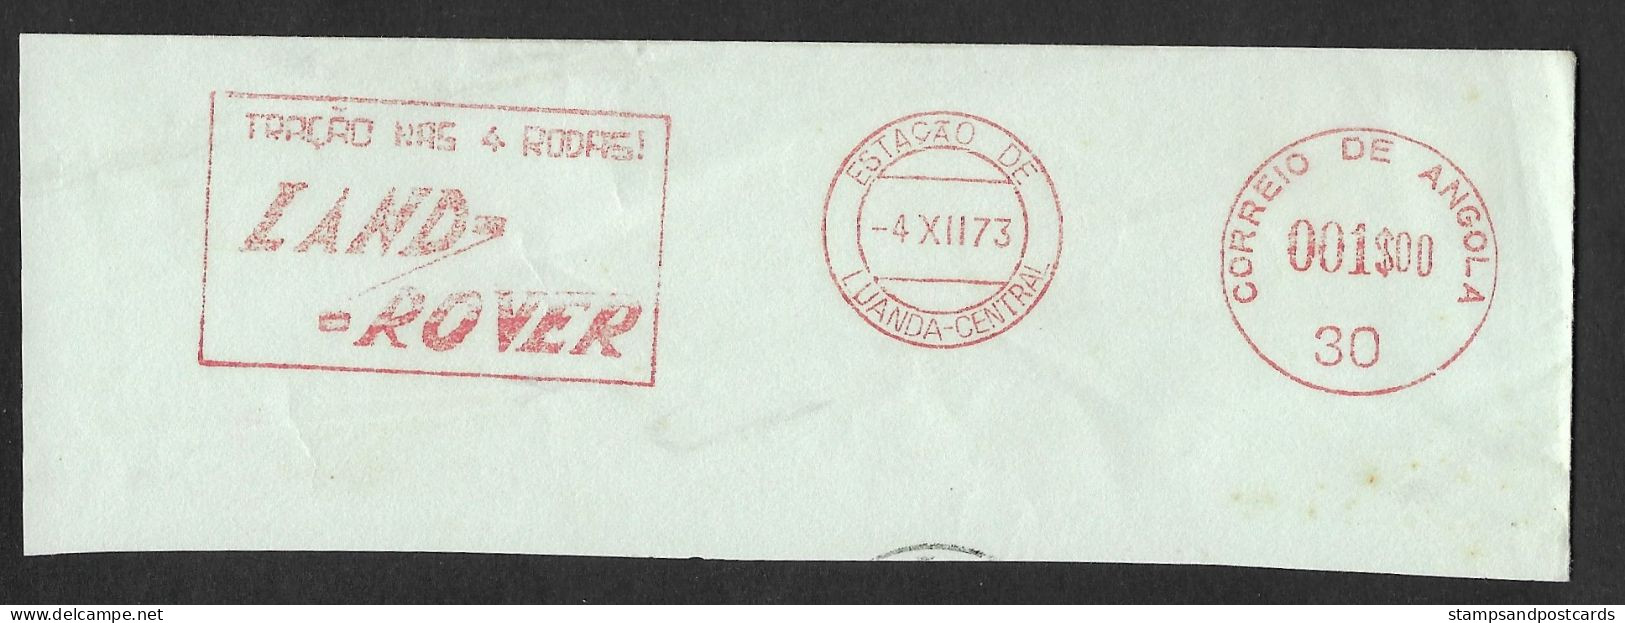 Angola Portugal EMA Cachet Rouge Concessionaire Land Rover 4 X 4 Tout Terrain 1973 Franking Meter Car Dealer - Coches